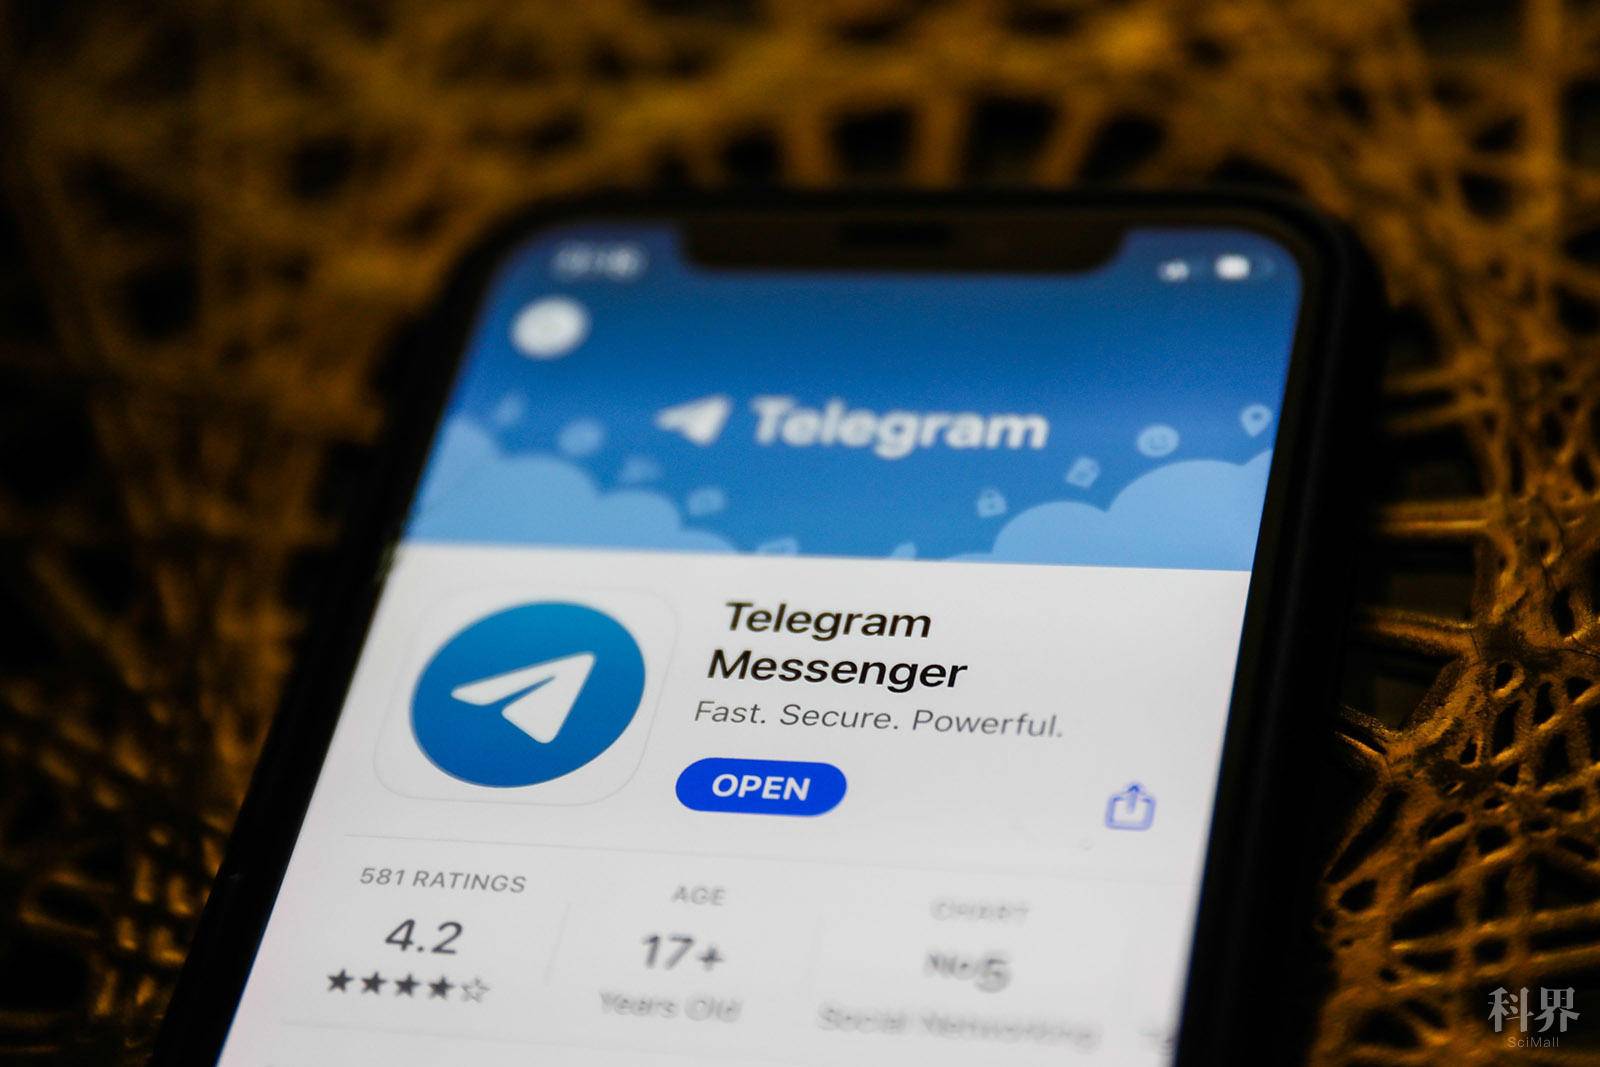 Telegram Messenger logo on the App Store is seen displayed on a phone screen in this illustration photo taken in Poland on January 14, 2021. Signal and Telegram messenger apps gained popularity due to the new WhatsApp's privacy policy. (Photo illustration by Jakub Porzycki/NurPhoto via Getty Images)